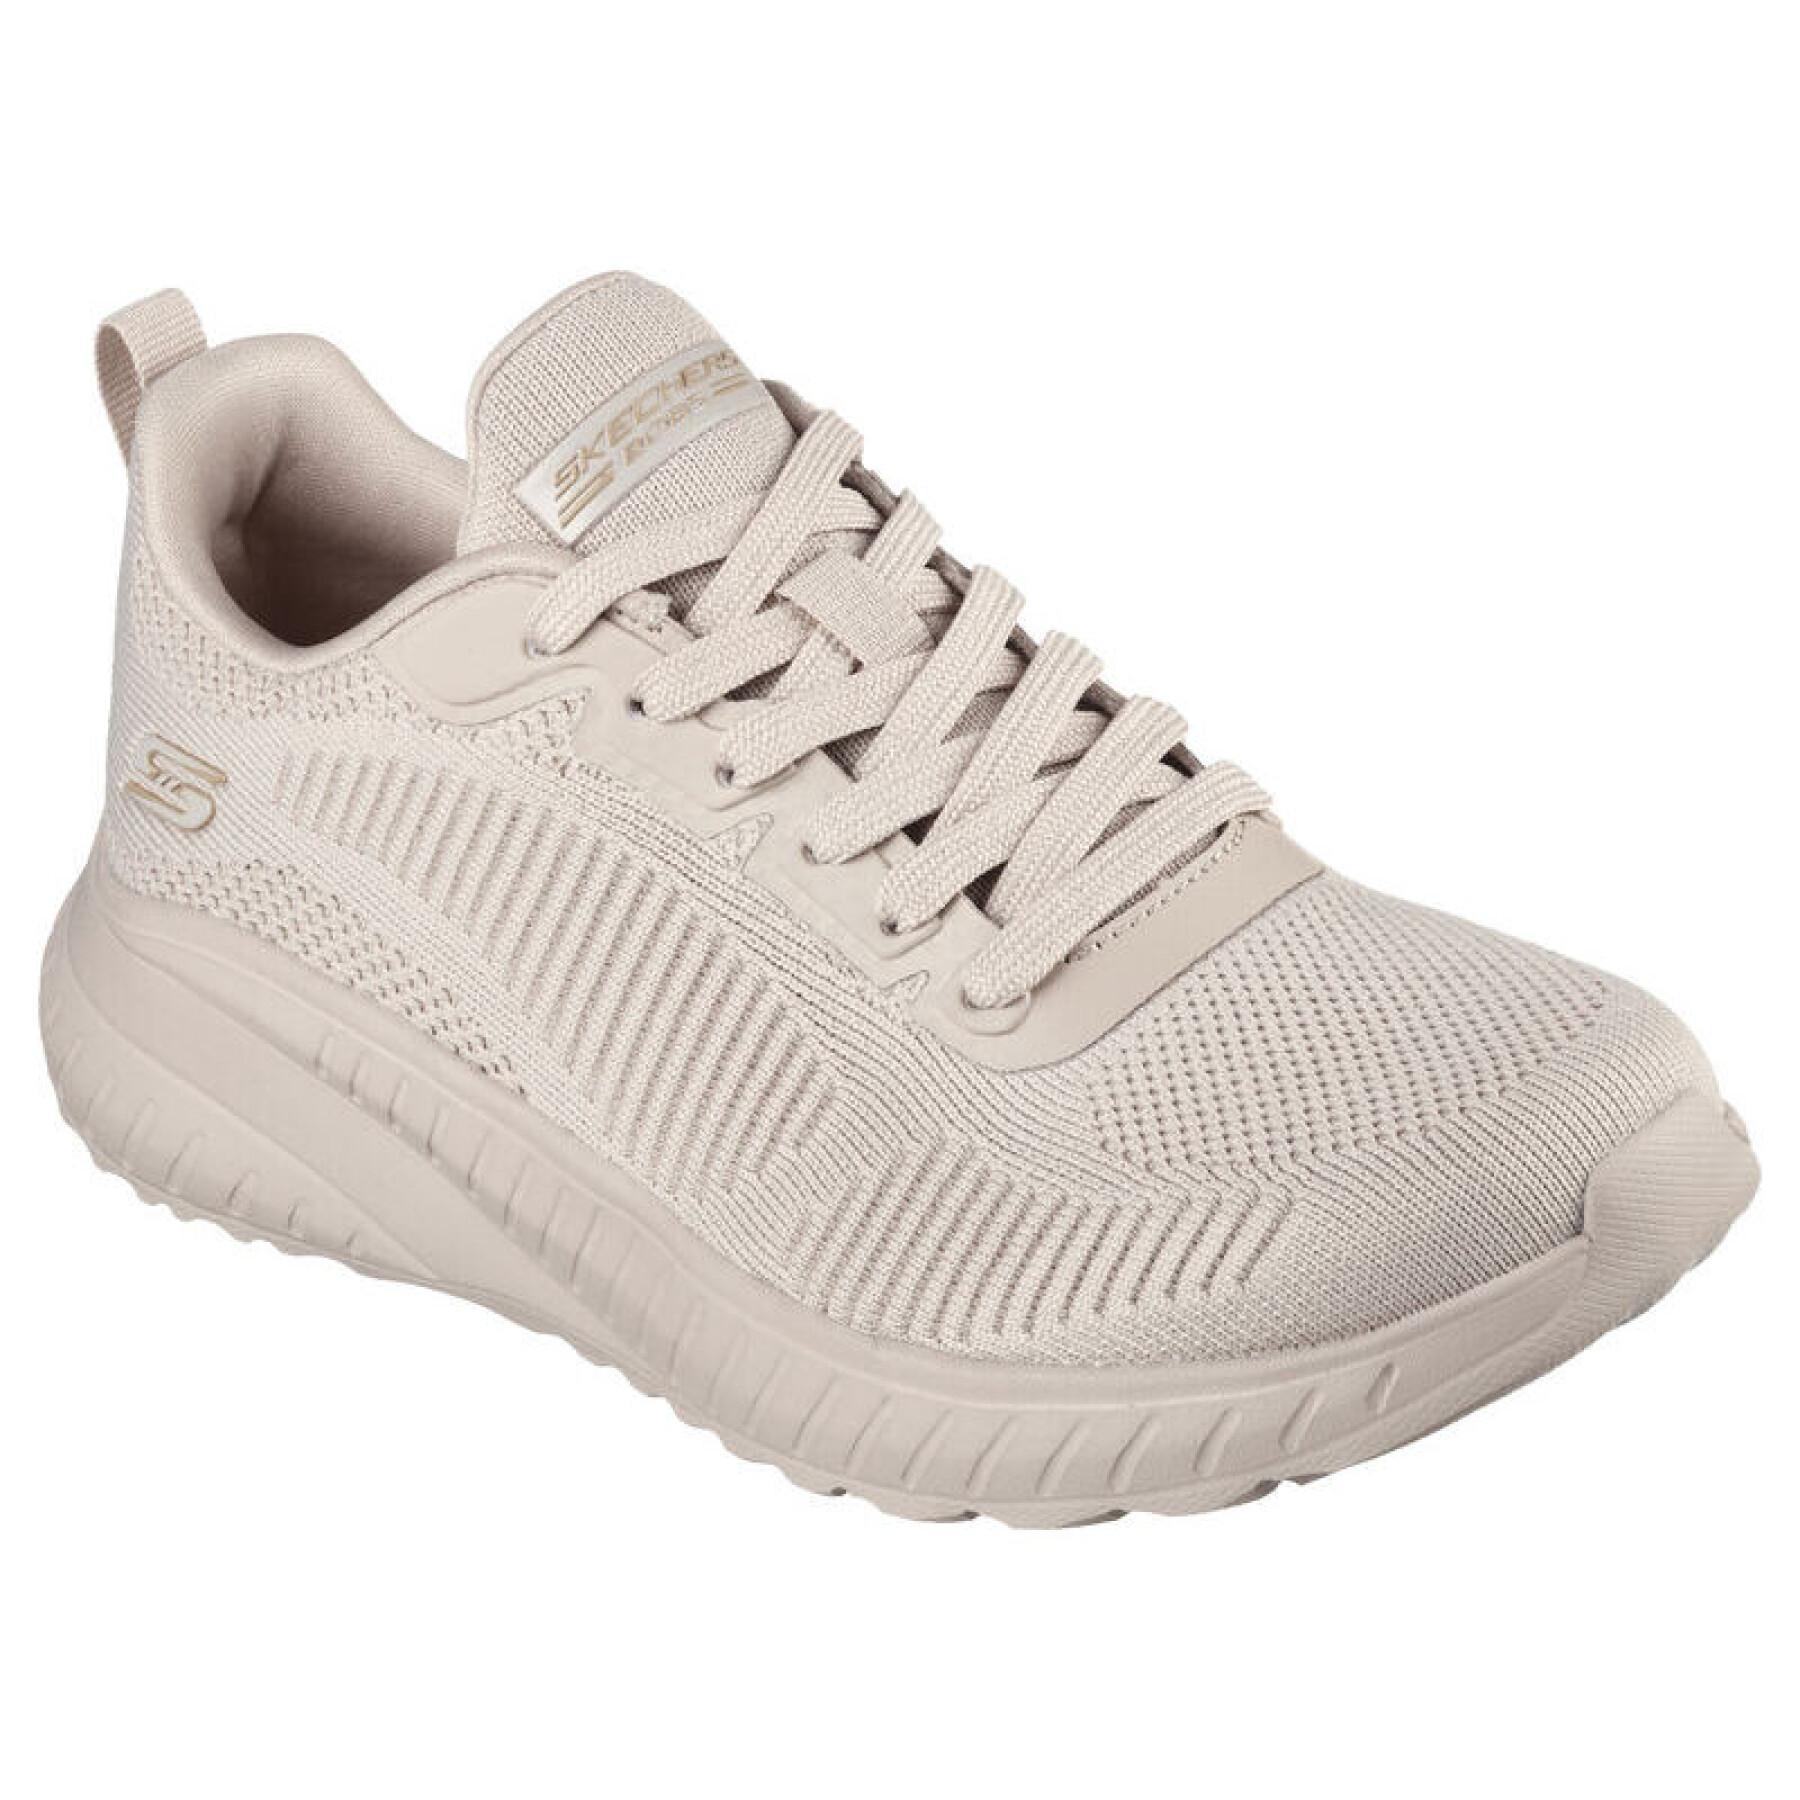 Women's sneakers Skechers Bobs Squad Chaos